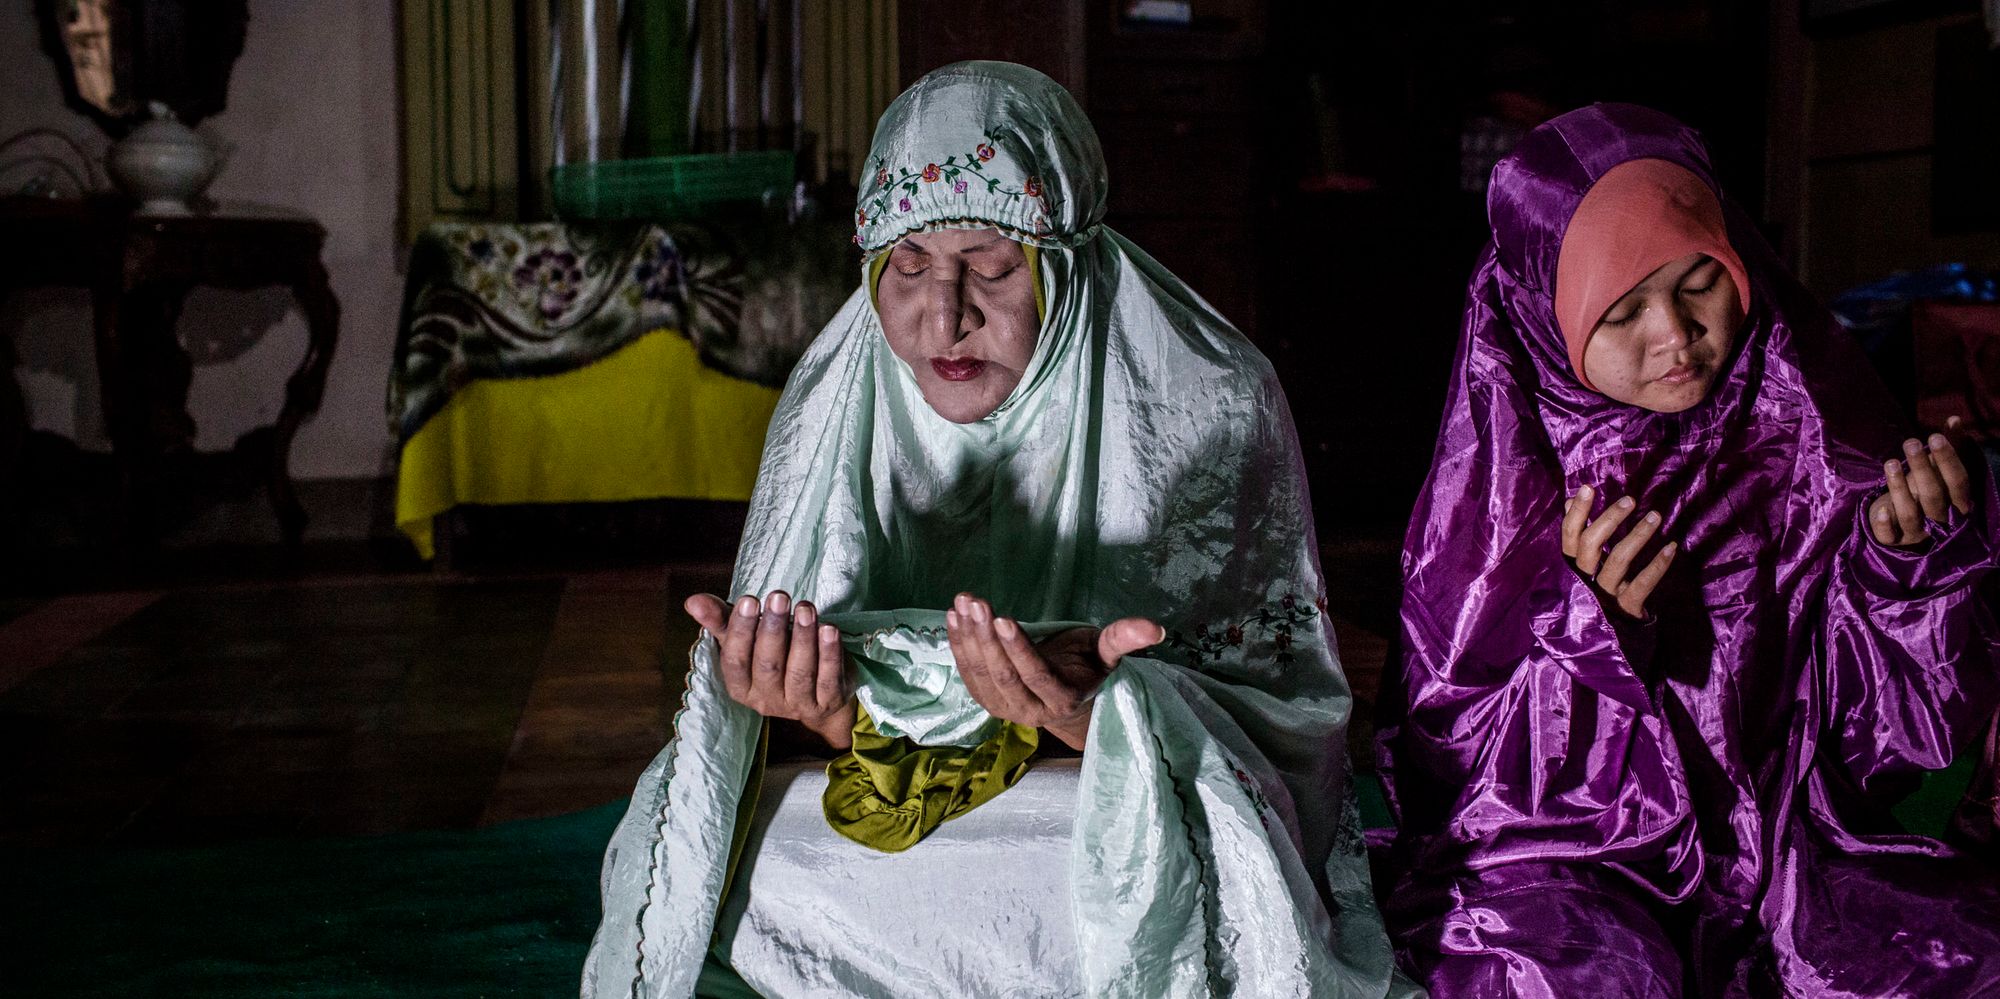 Indonesia S Transgender Muslims Known As Waria Celebrate Ramadan The Huffington Post